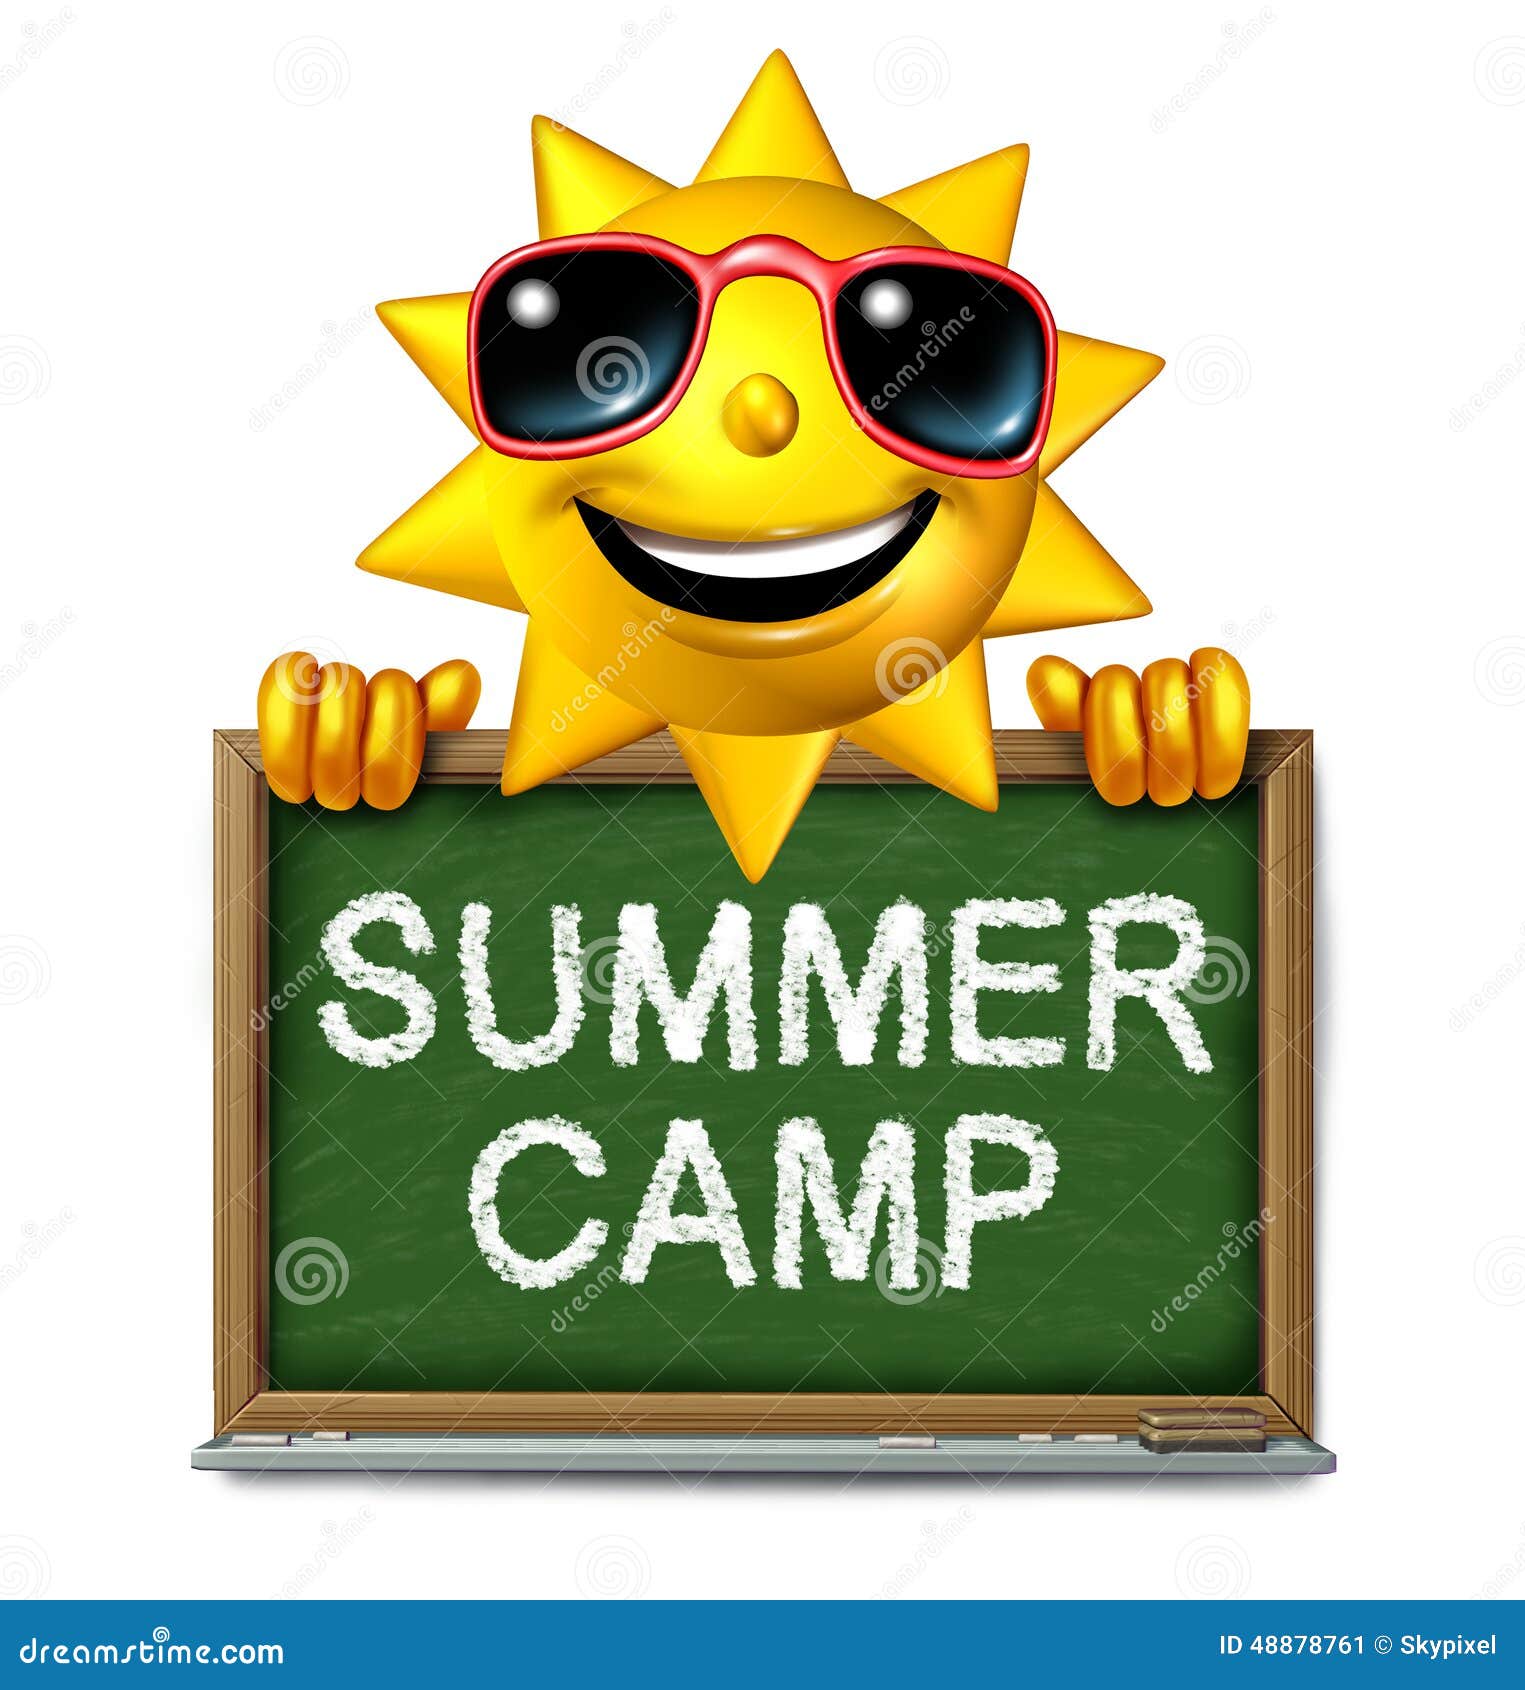 summer camp clipart images - photo #41